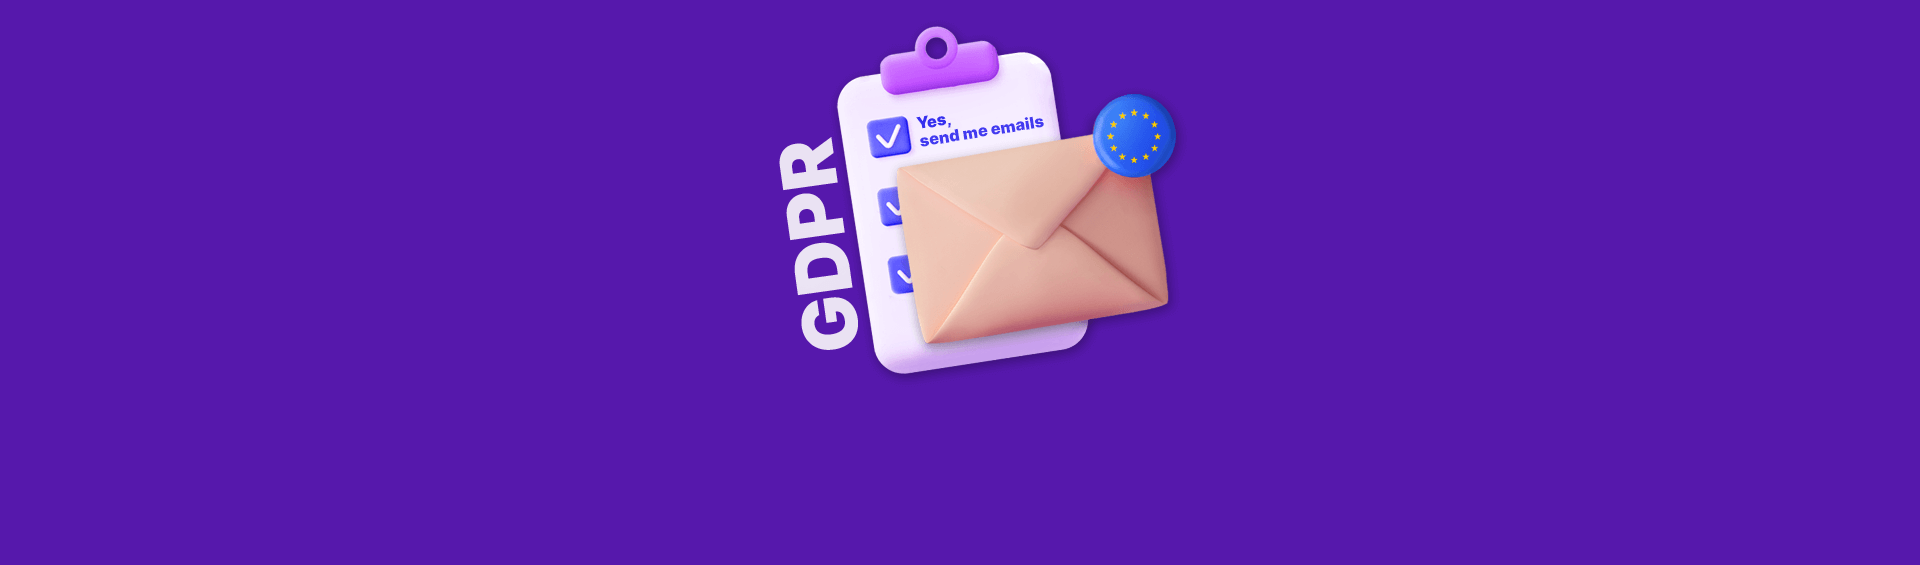 GDPR And Email Marketing: What You Need To Know If You Send Emails